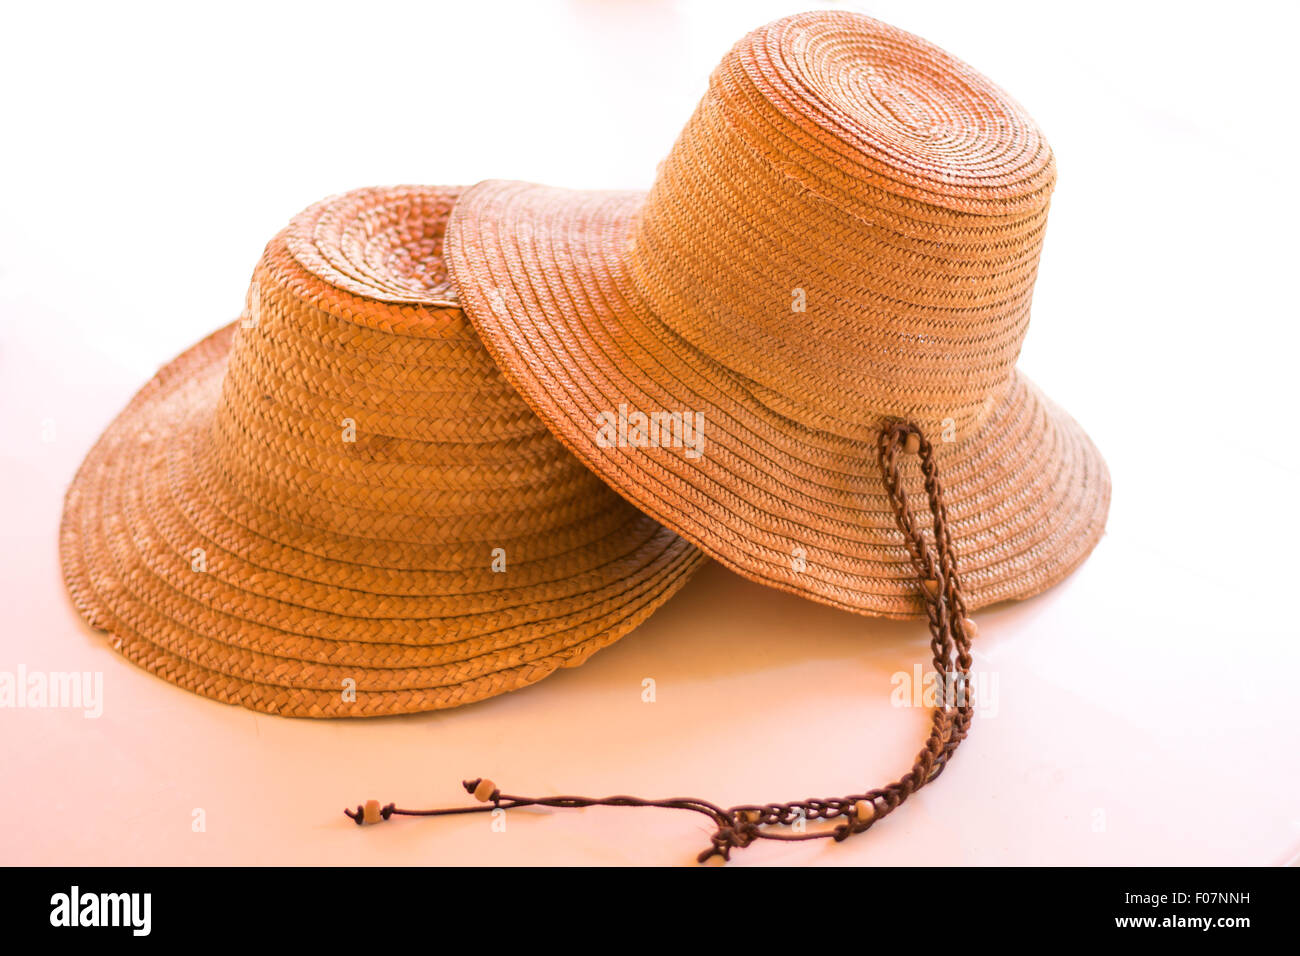 Two fashionable straw hats isolated on white. Stock Photo